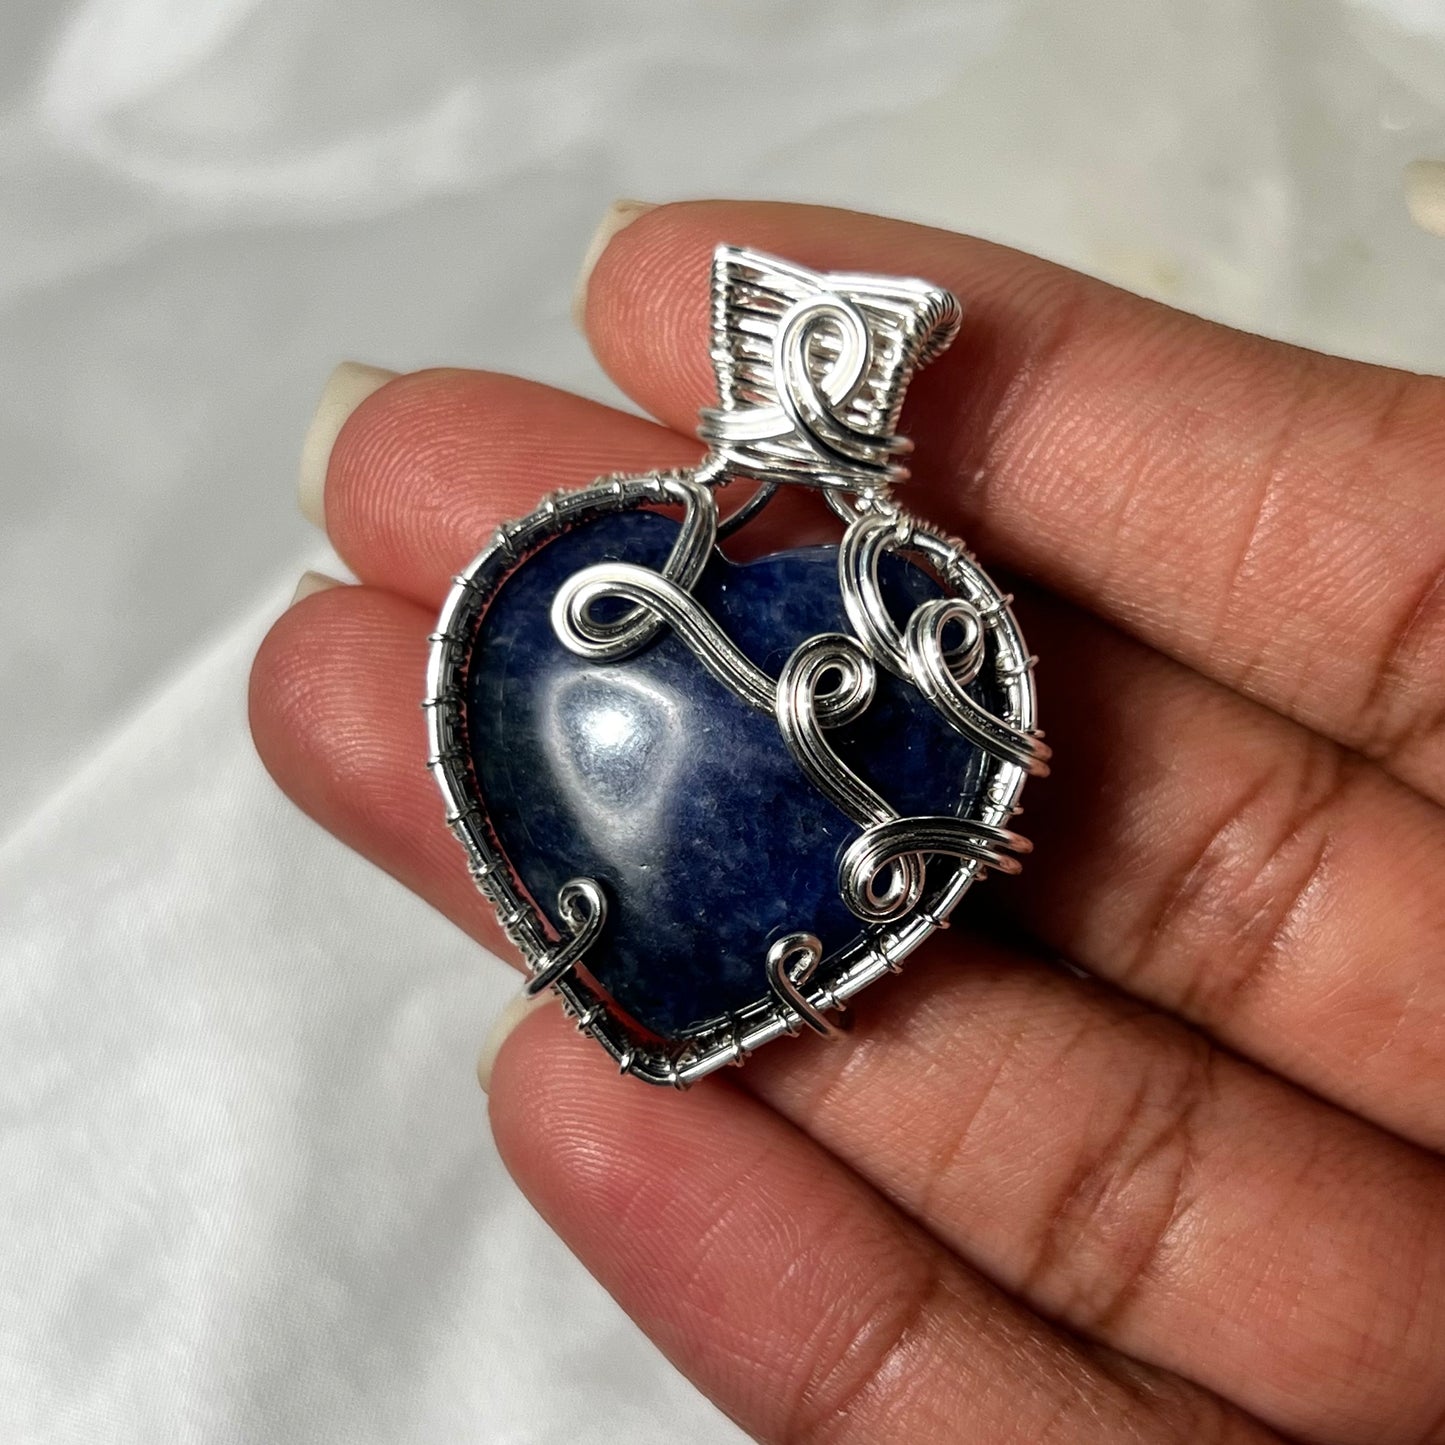 Sodalite Heart Necklace